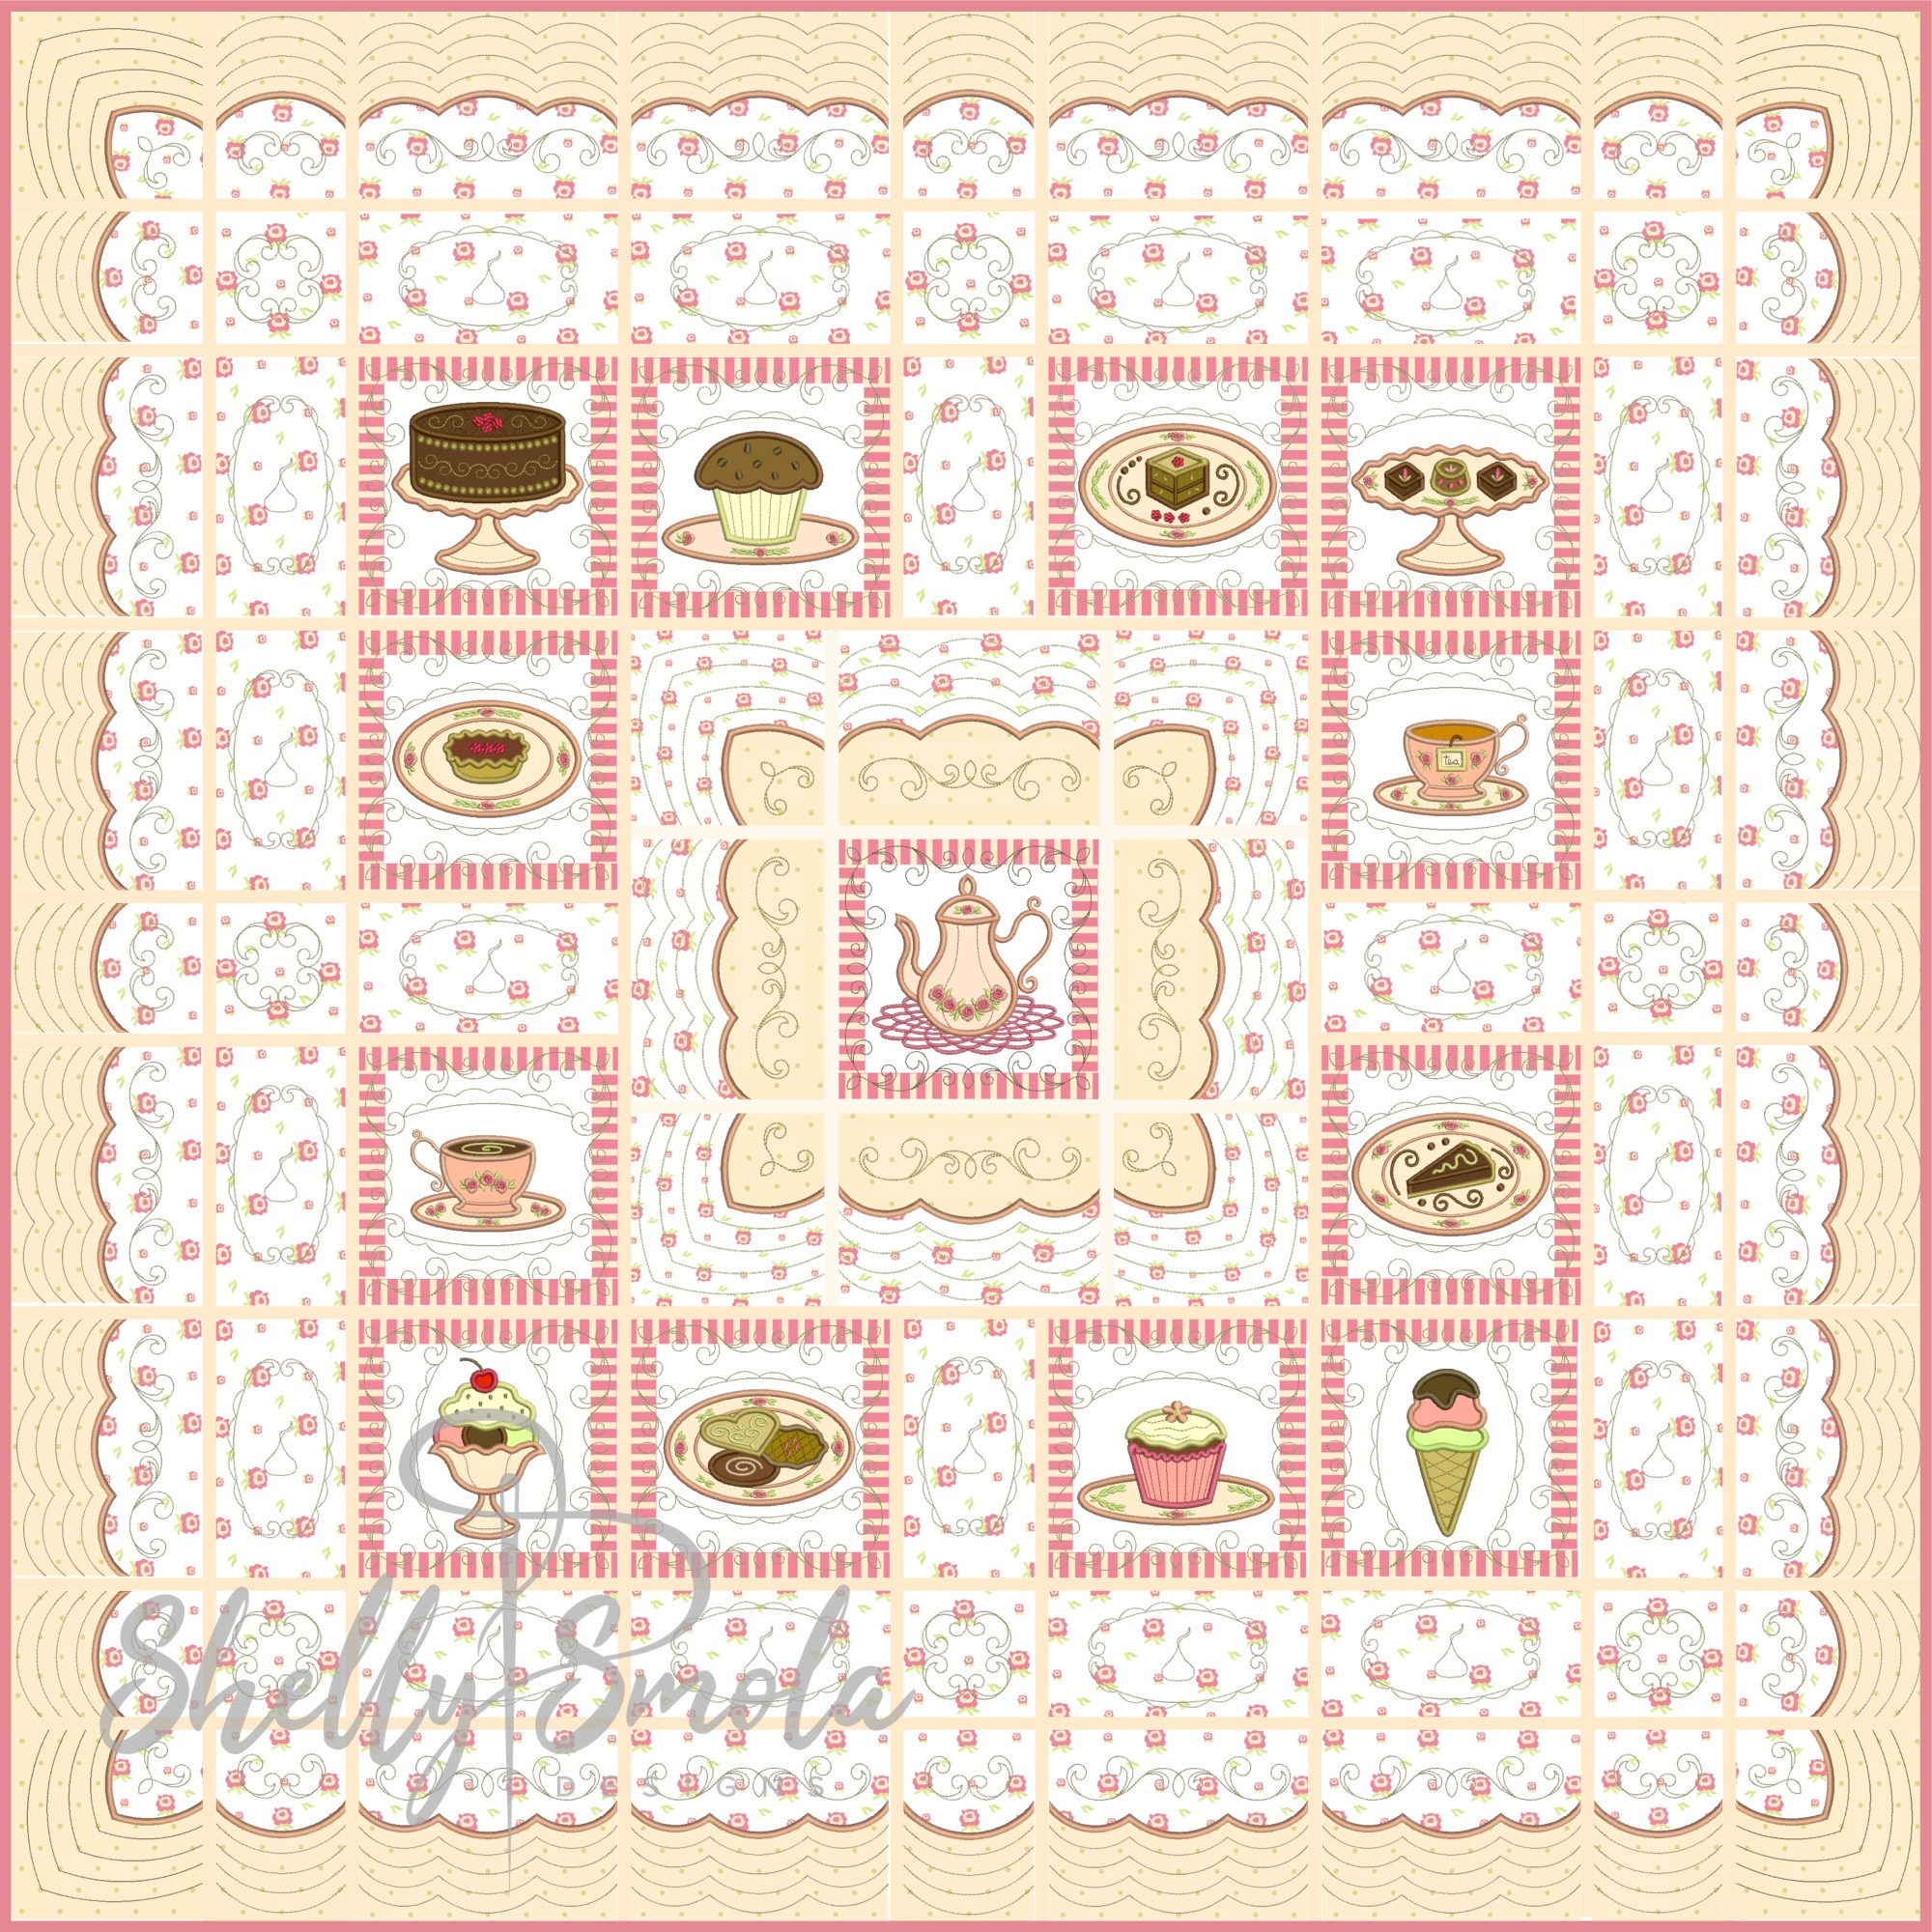 Sweet Temptations Quilt Layout Idea by Shelly Smola